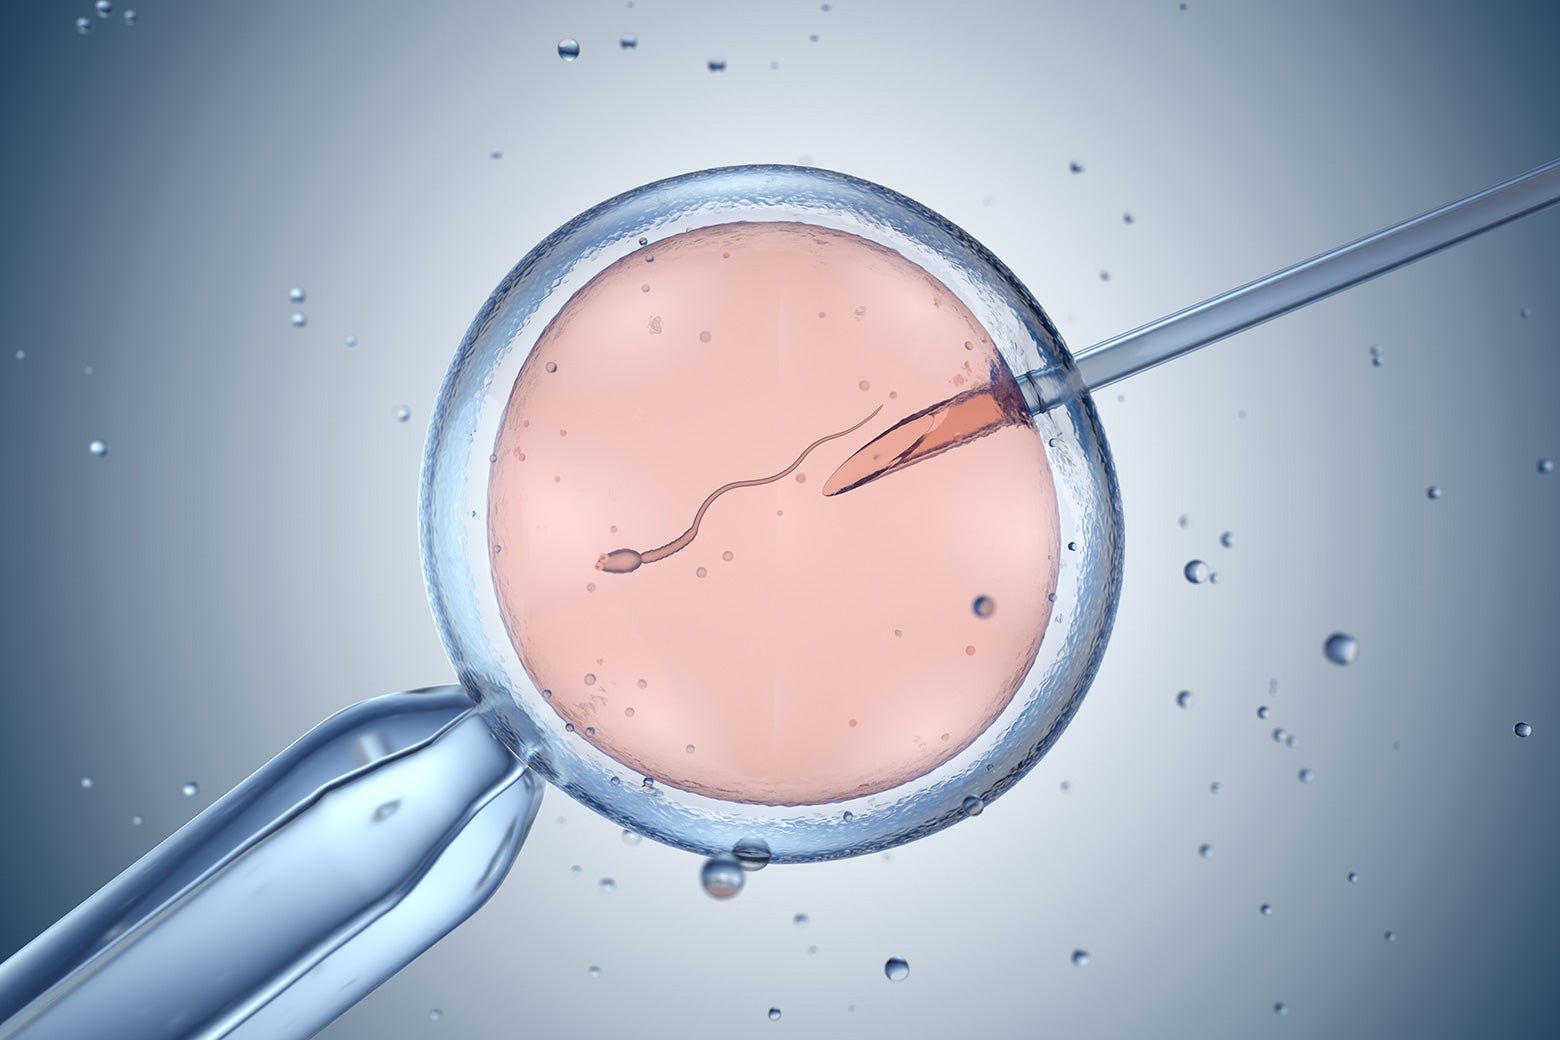 There’s an Enormous, Impossible-to-Resolve Contradiction in Alabama’s Anti-IVF Ruling John Culhane